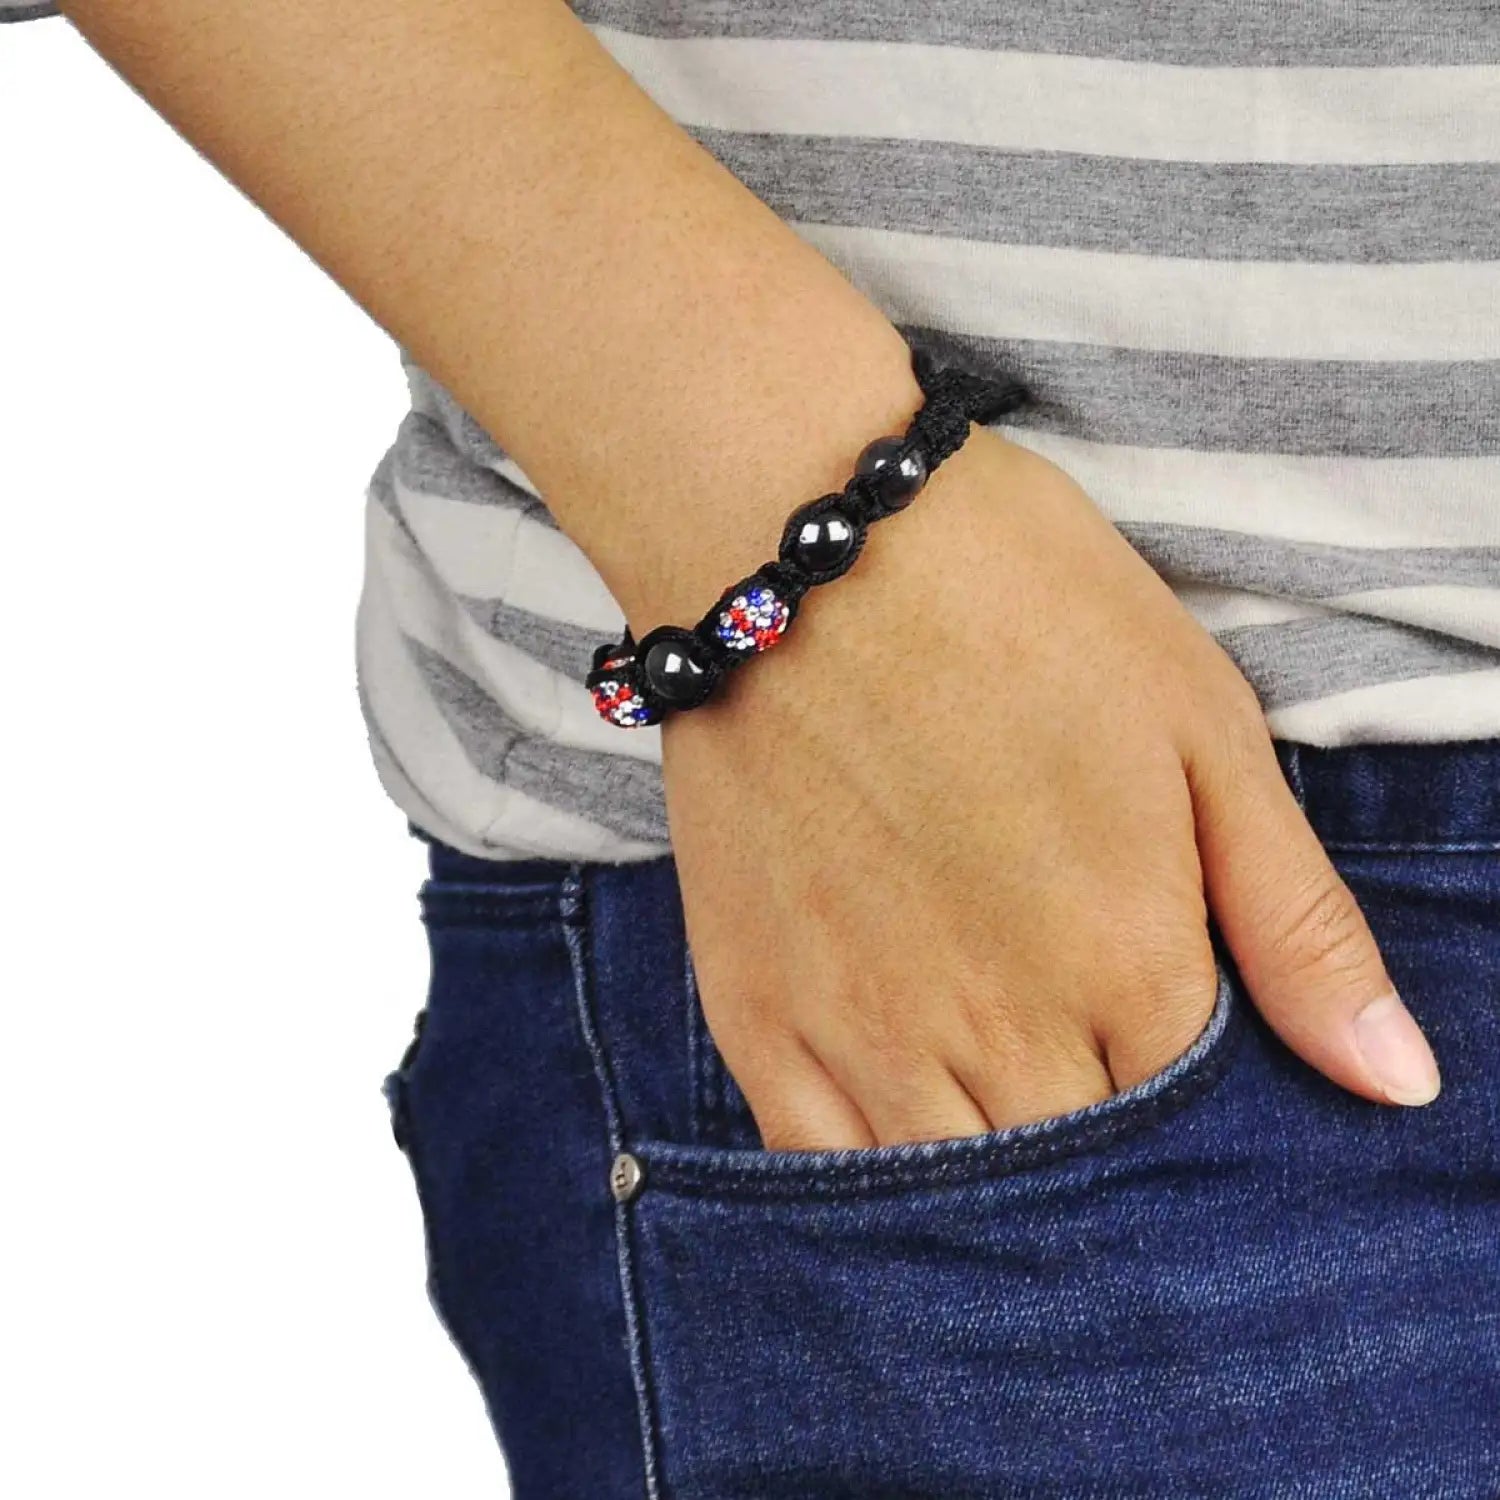 Person wearing Union Jack Shamballa Beaded Bracelet Ring set with red and blue flower design